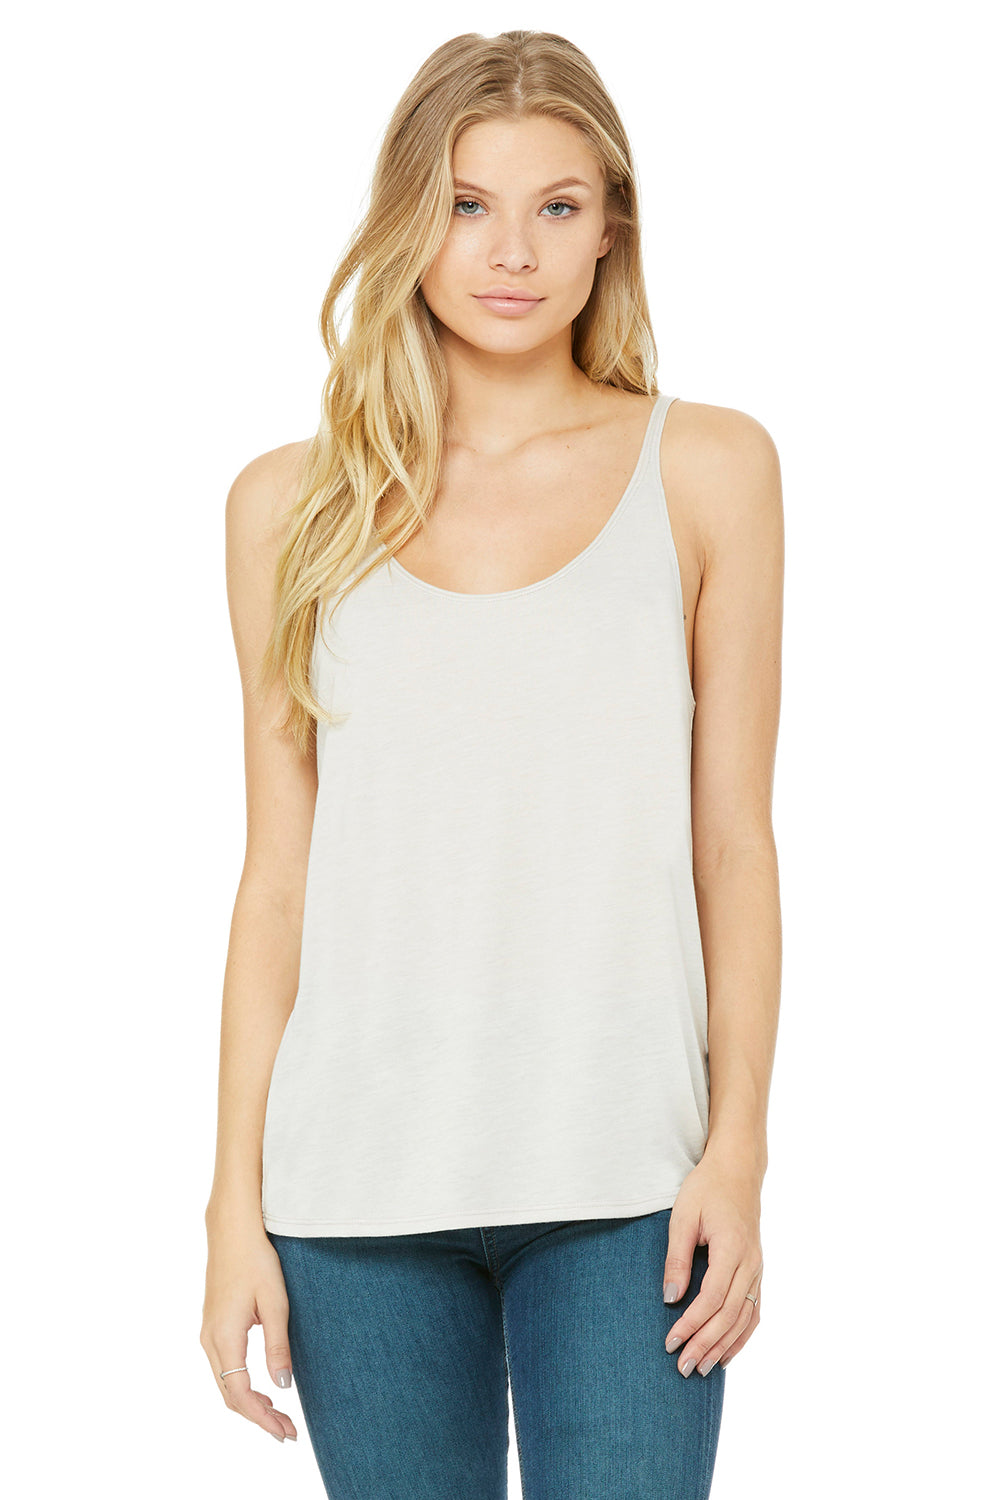 Bella + Canvas 8838 Womens Slouchy Tank Top Heather Dust Front